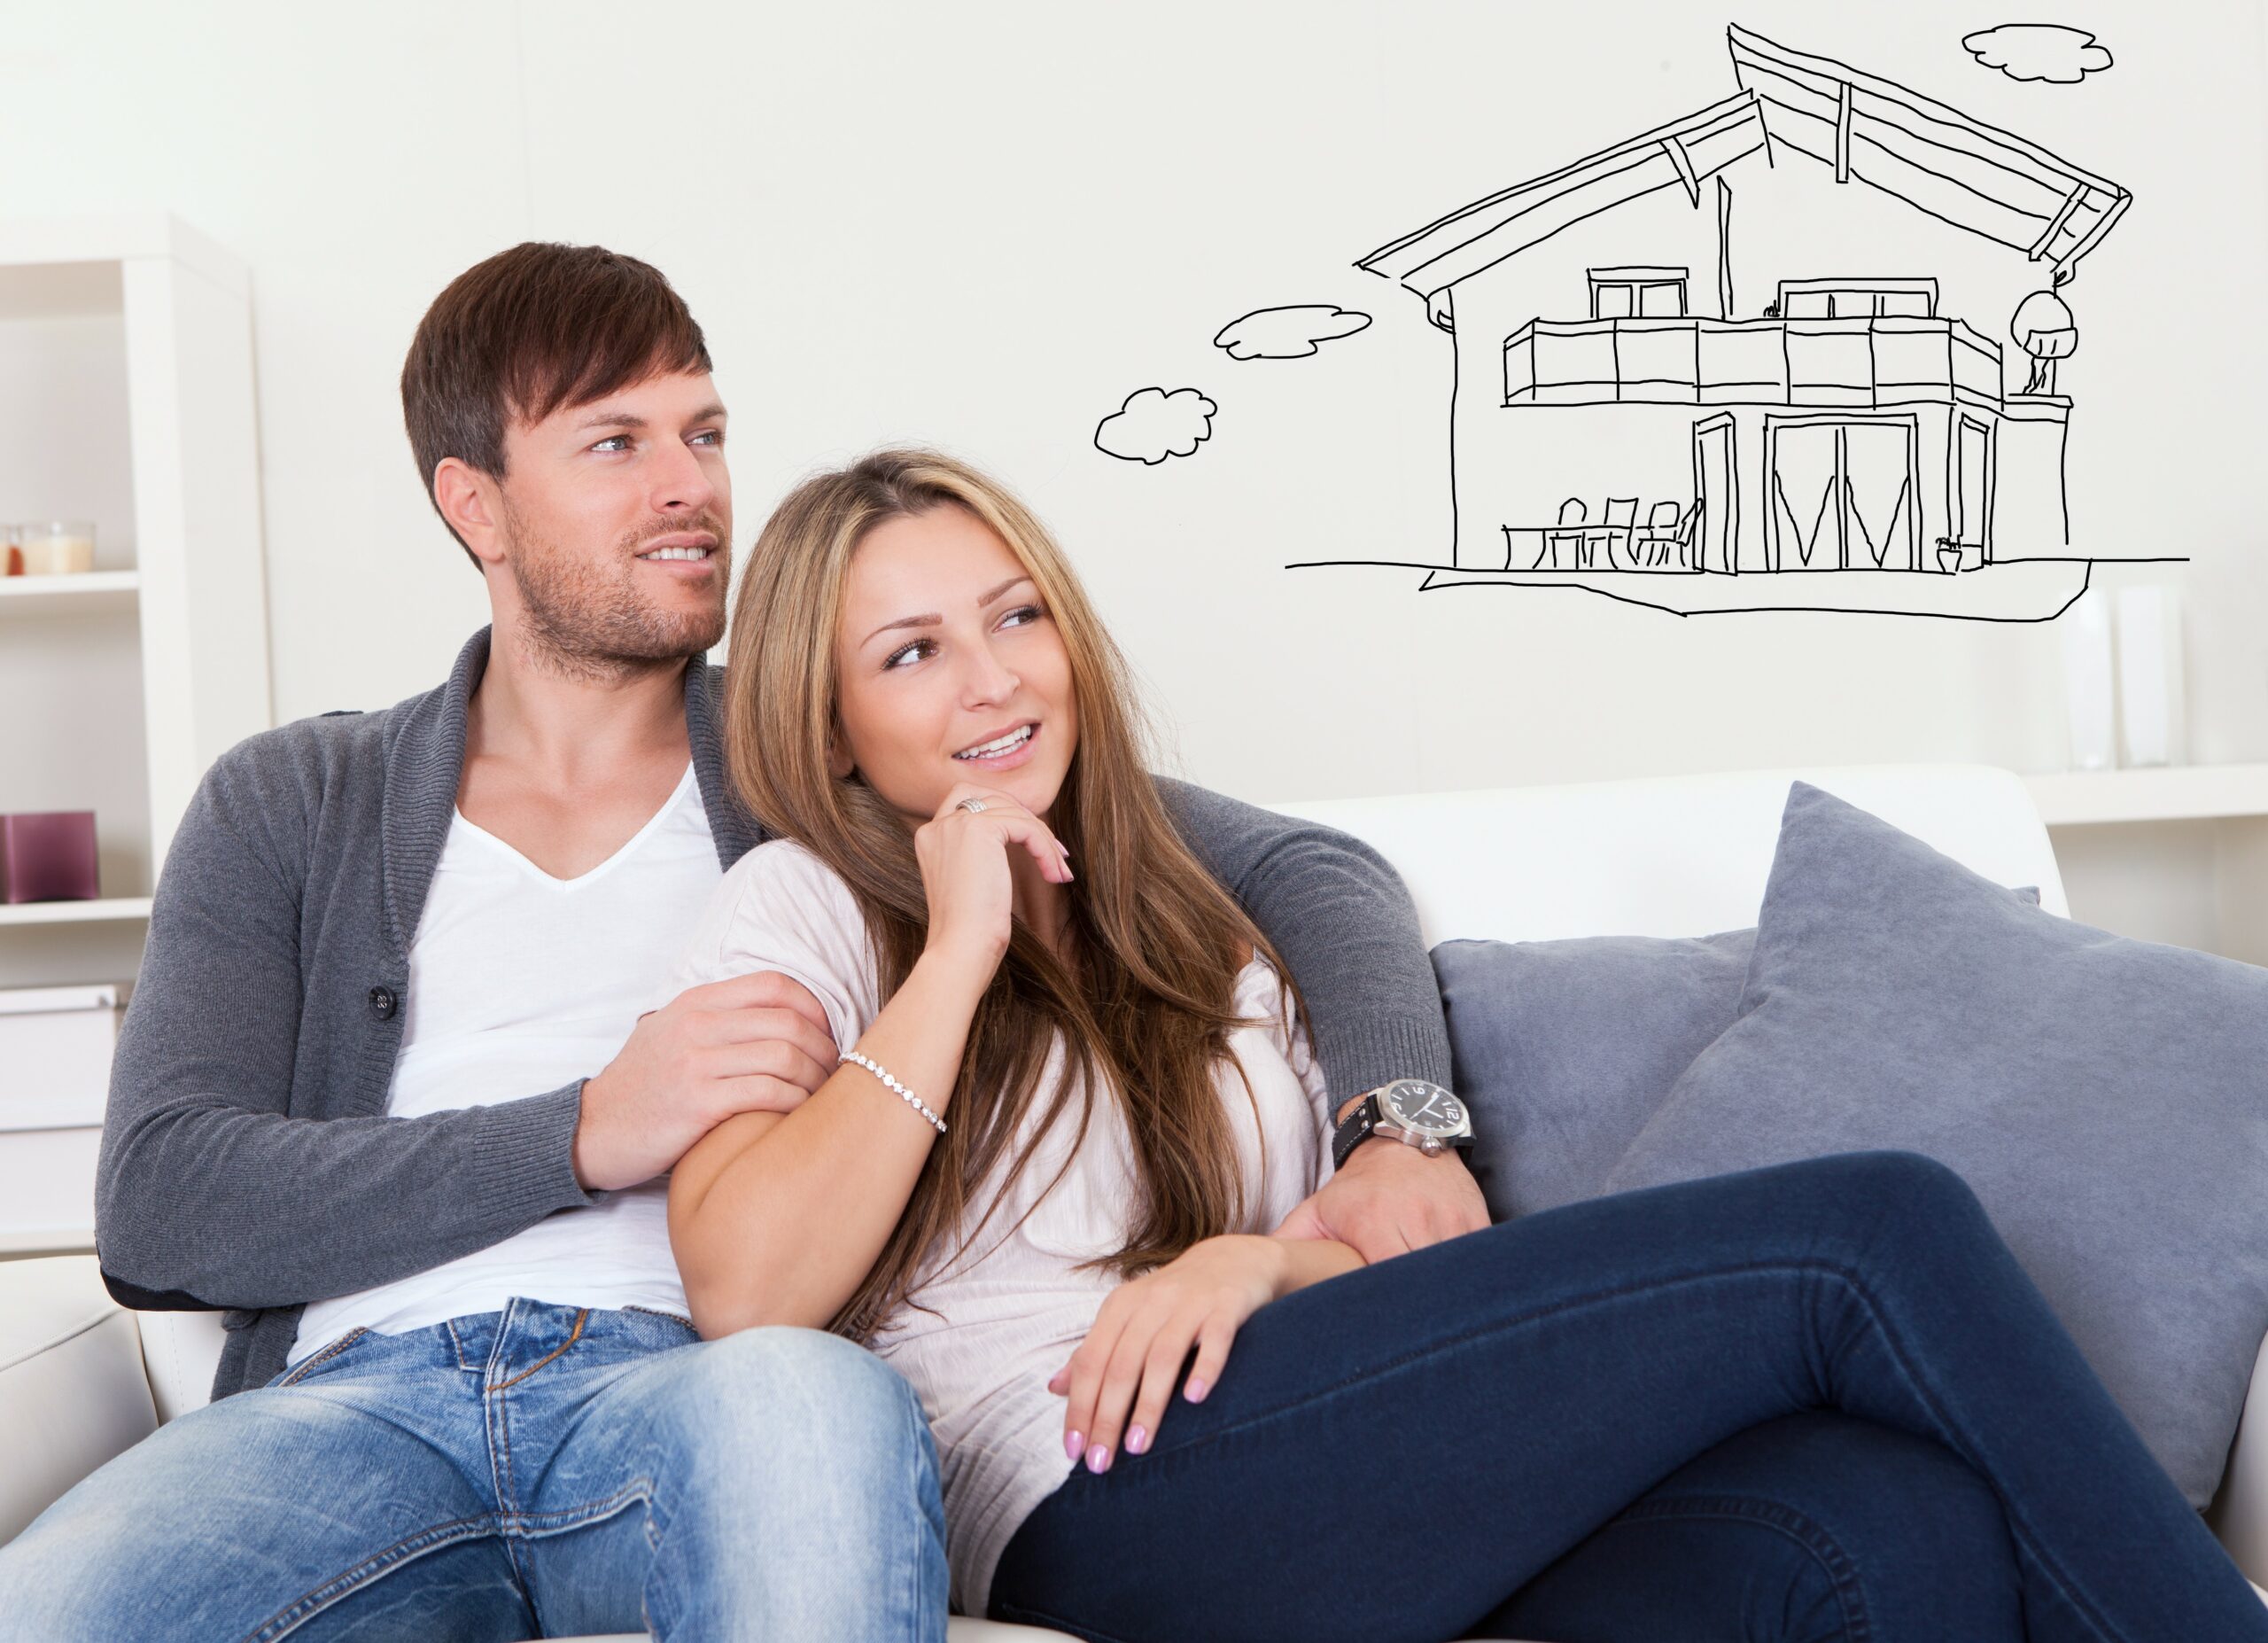 What Are Some Things First Time Home Buyers Usually Fall For?